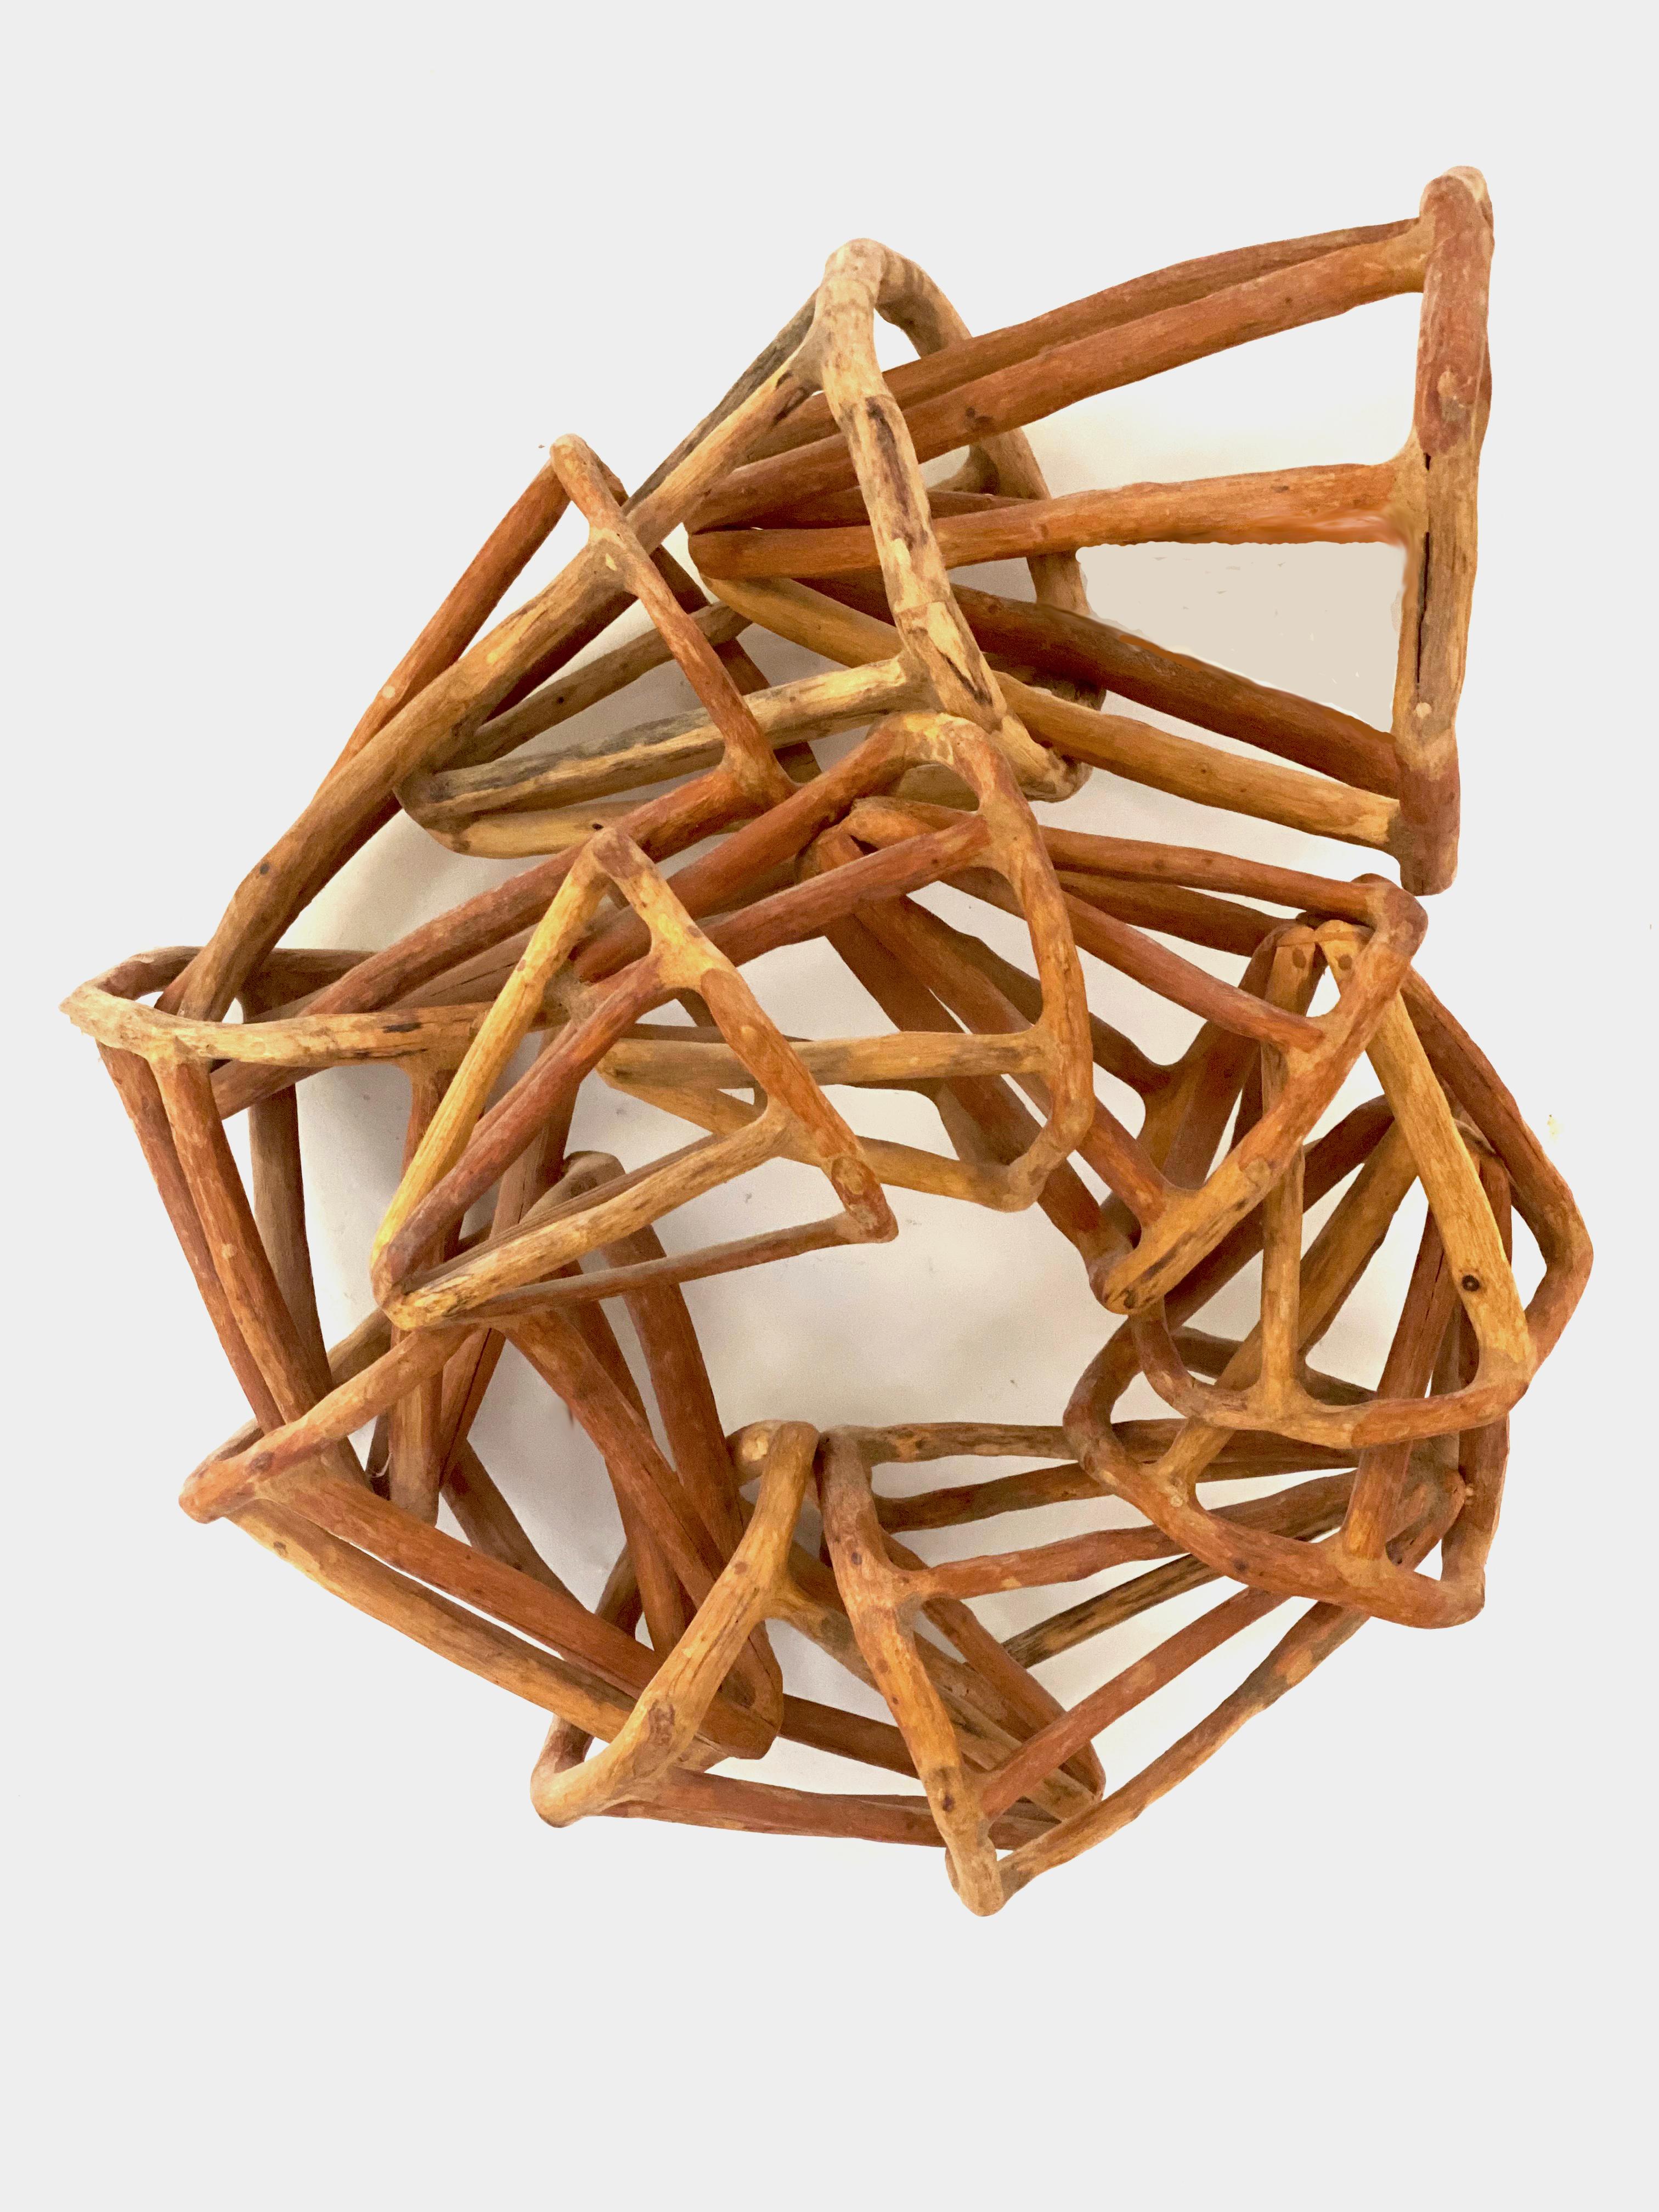 Loren Eiferman Abstract Sculpture - Wood Sculpture, 167 pieces: 'To Be Continued'